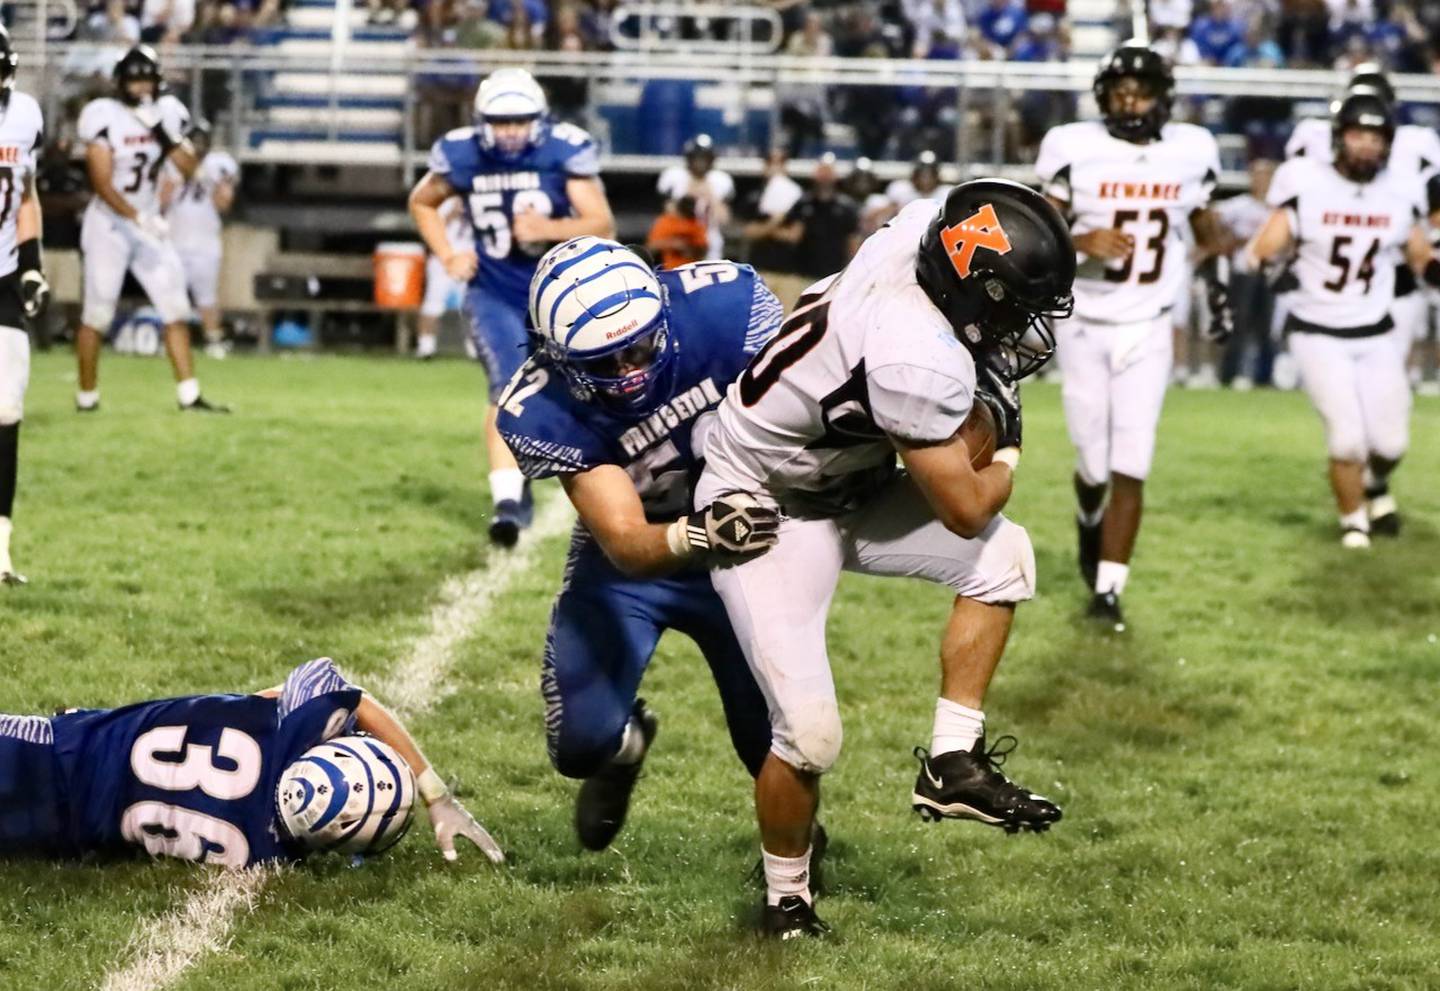 Princeton's Ian Morris makes the tackle against Kewanee Friday night at Bryant Field.